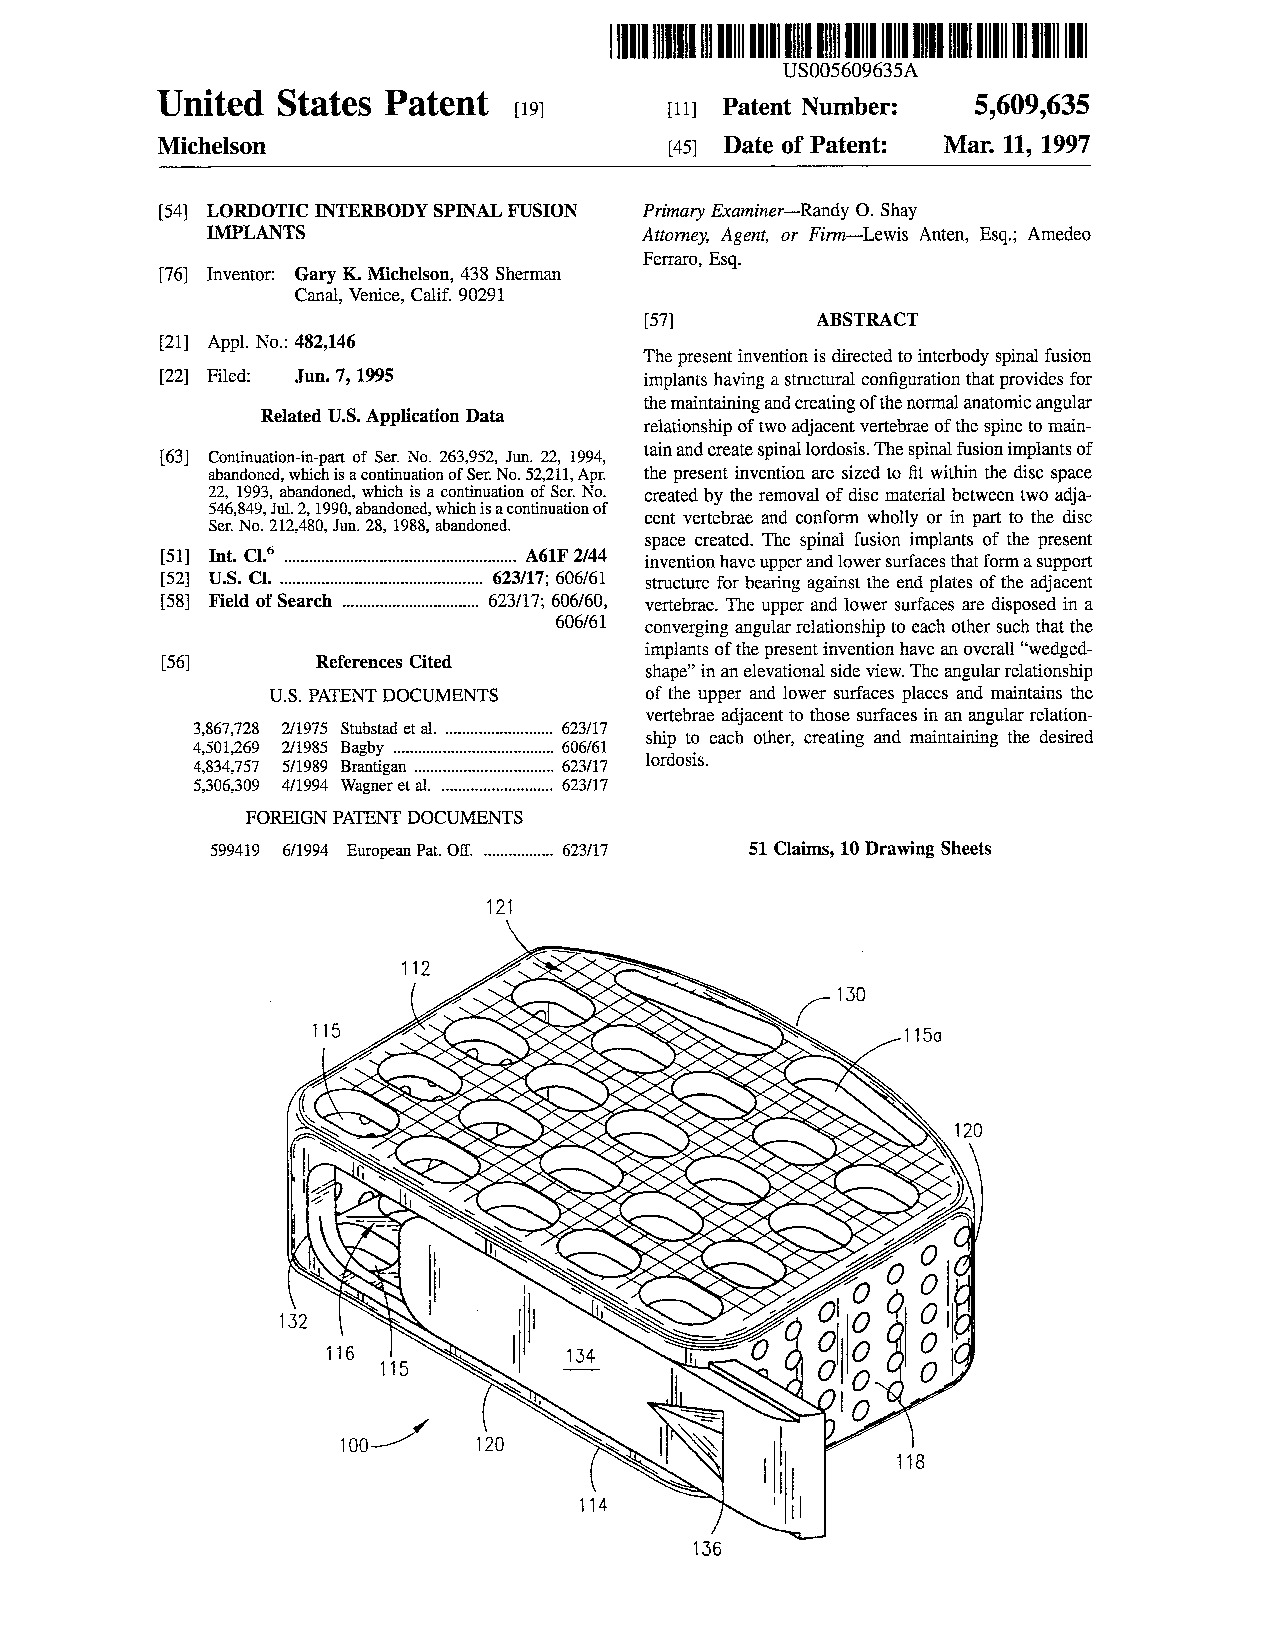 Lordotic interbody spinal fusion implants - Patent 5,609,635